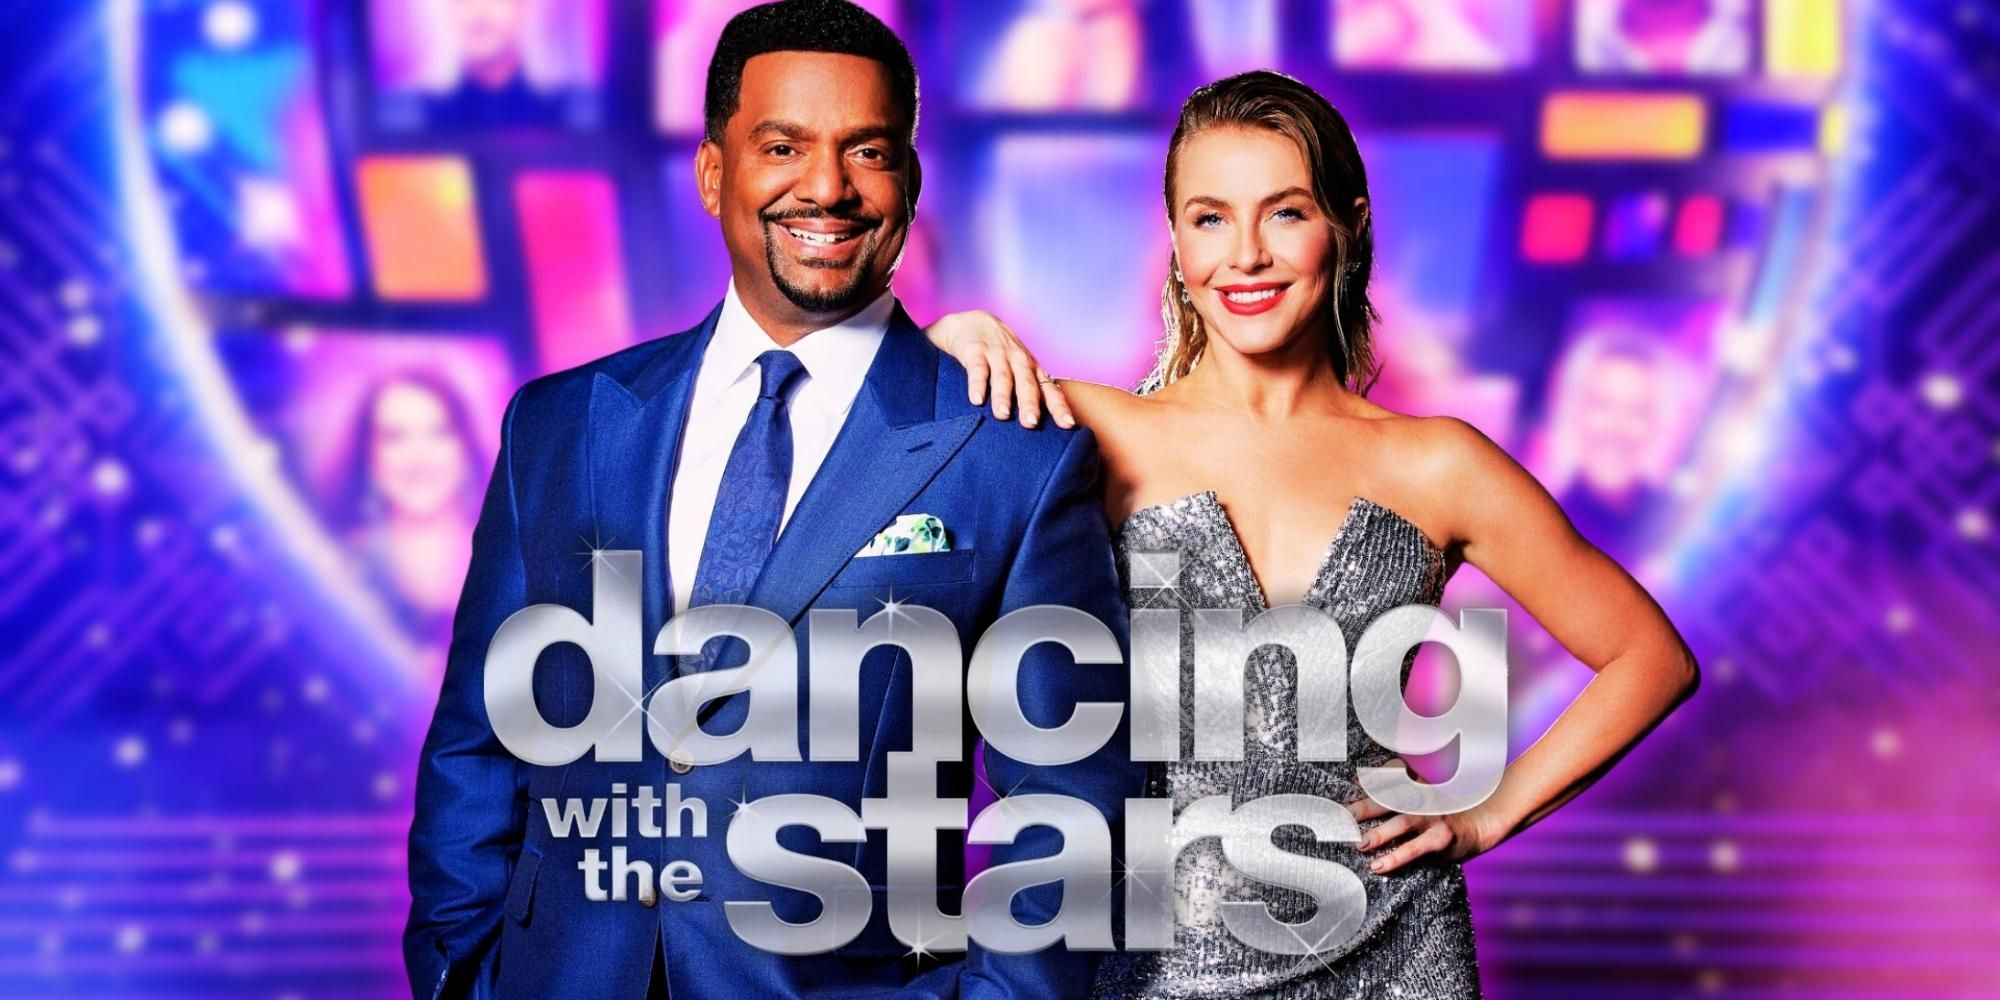 Dancing With The Stars Season 32 - News, Release Date, Cast ...